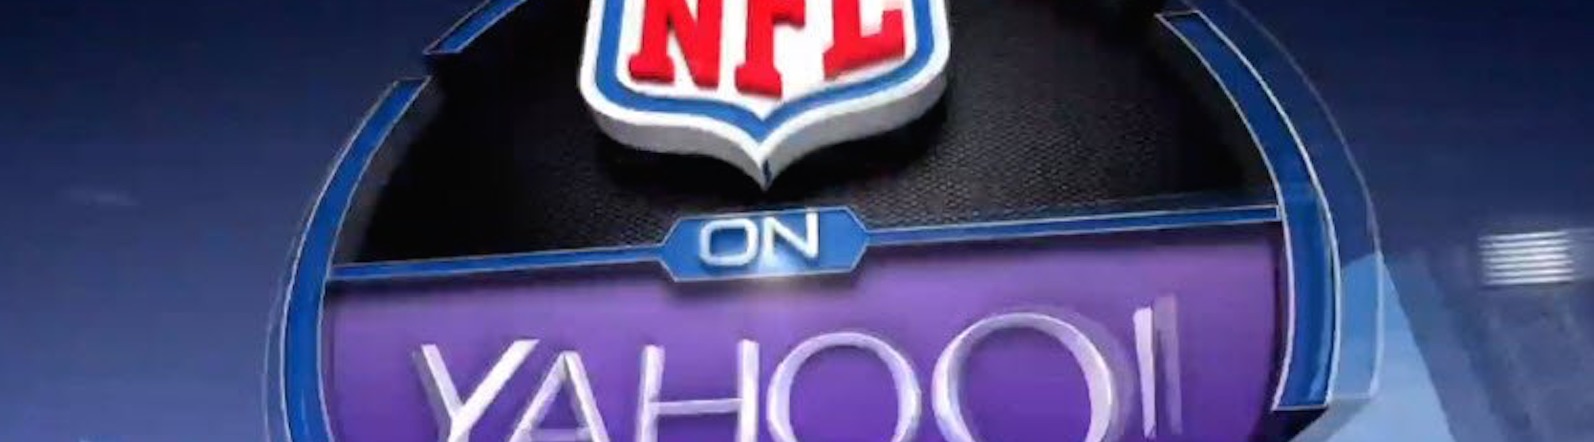 Despite technical problems, 15 million people watched Yahoo's NFL